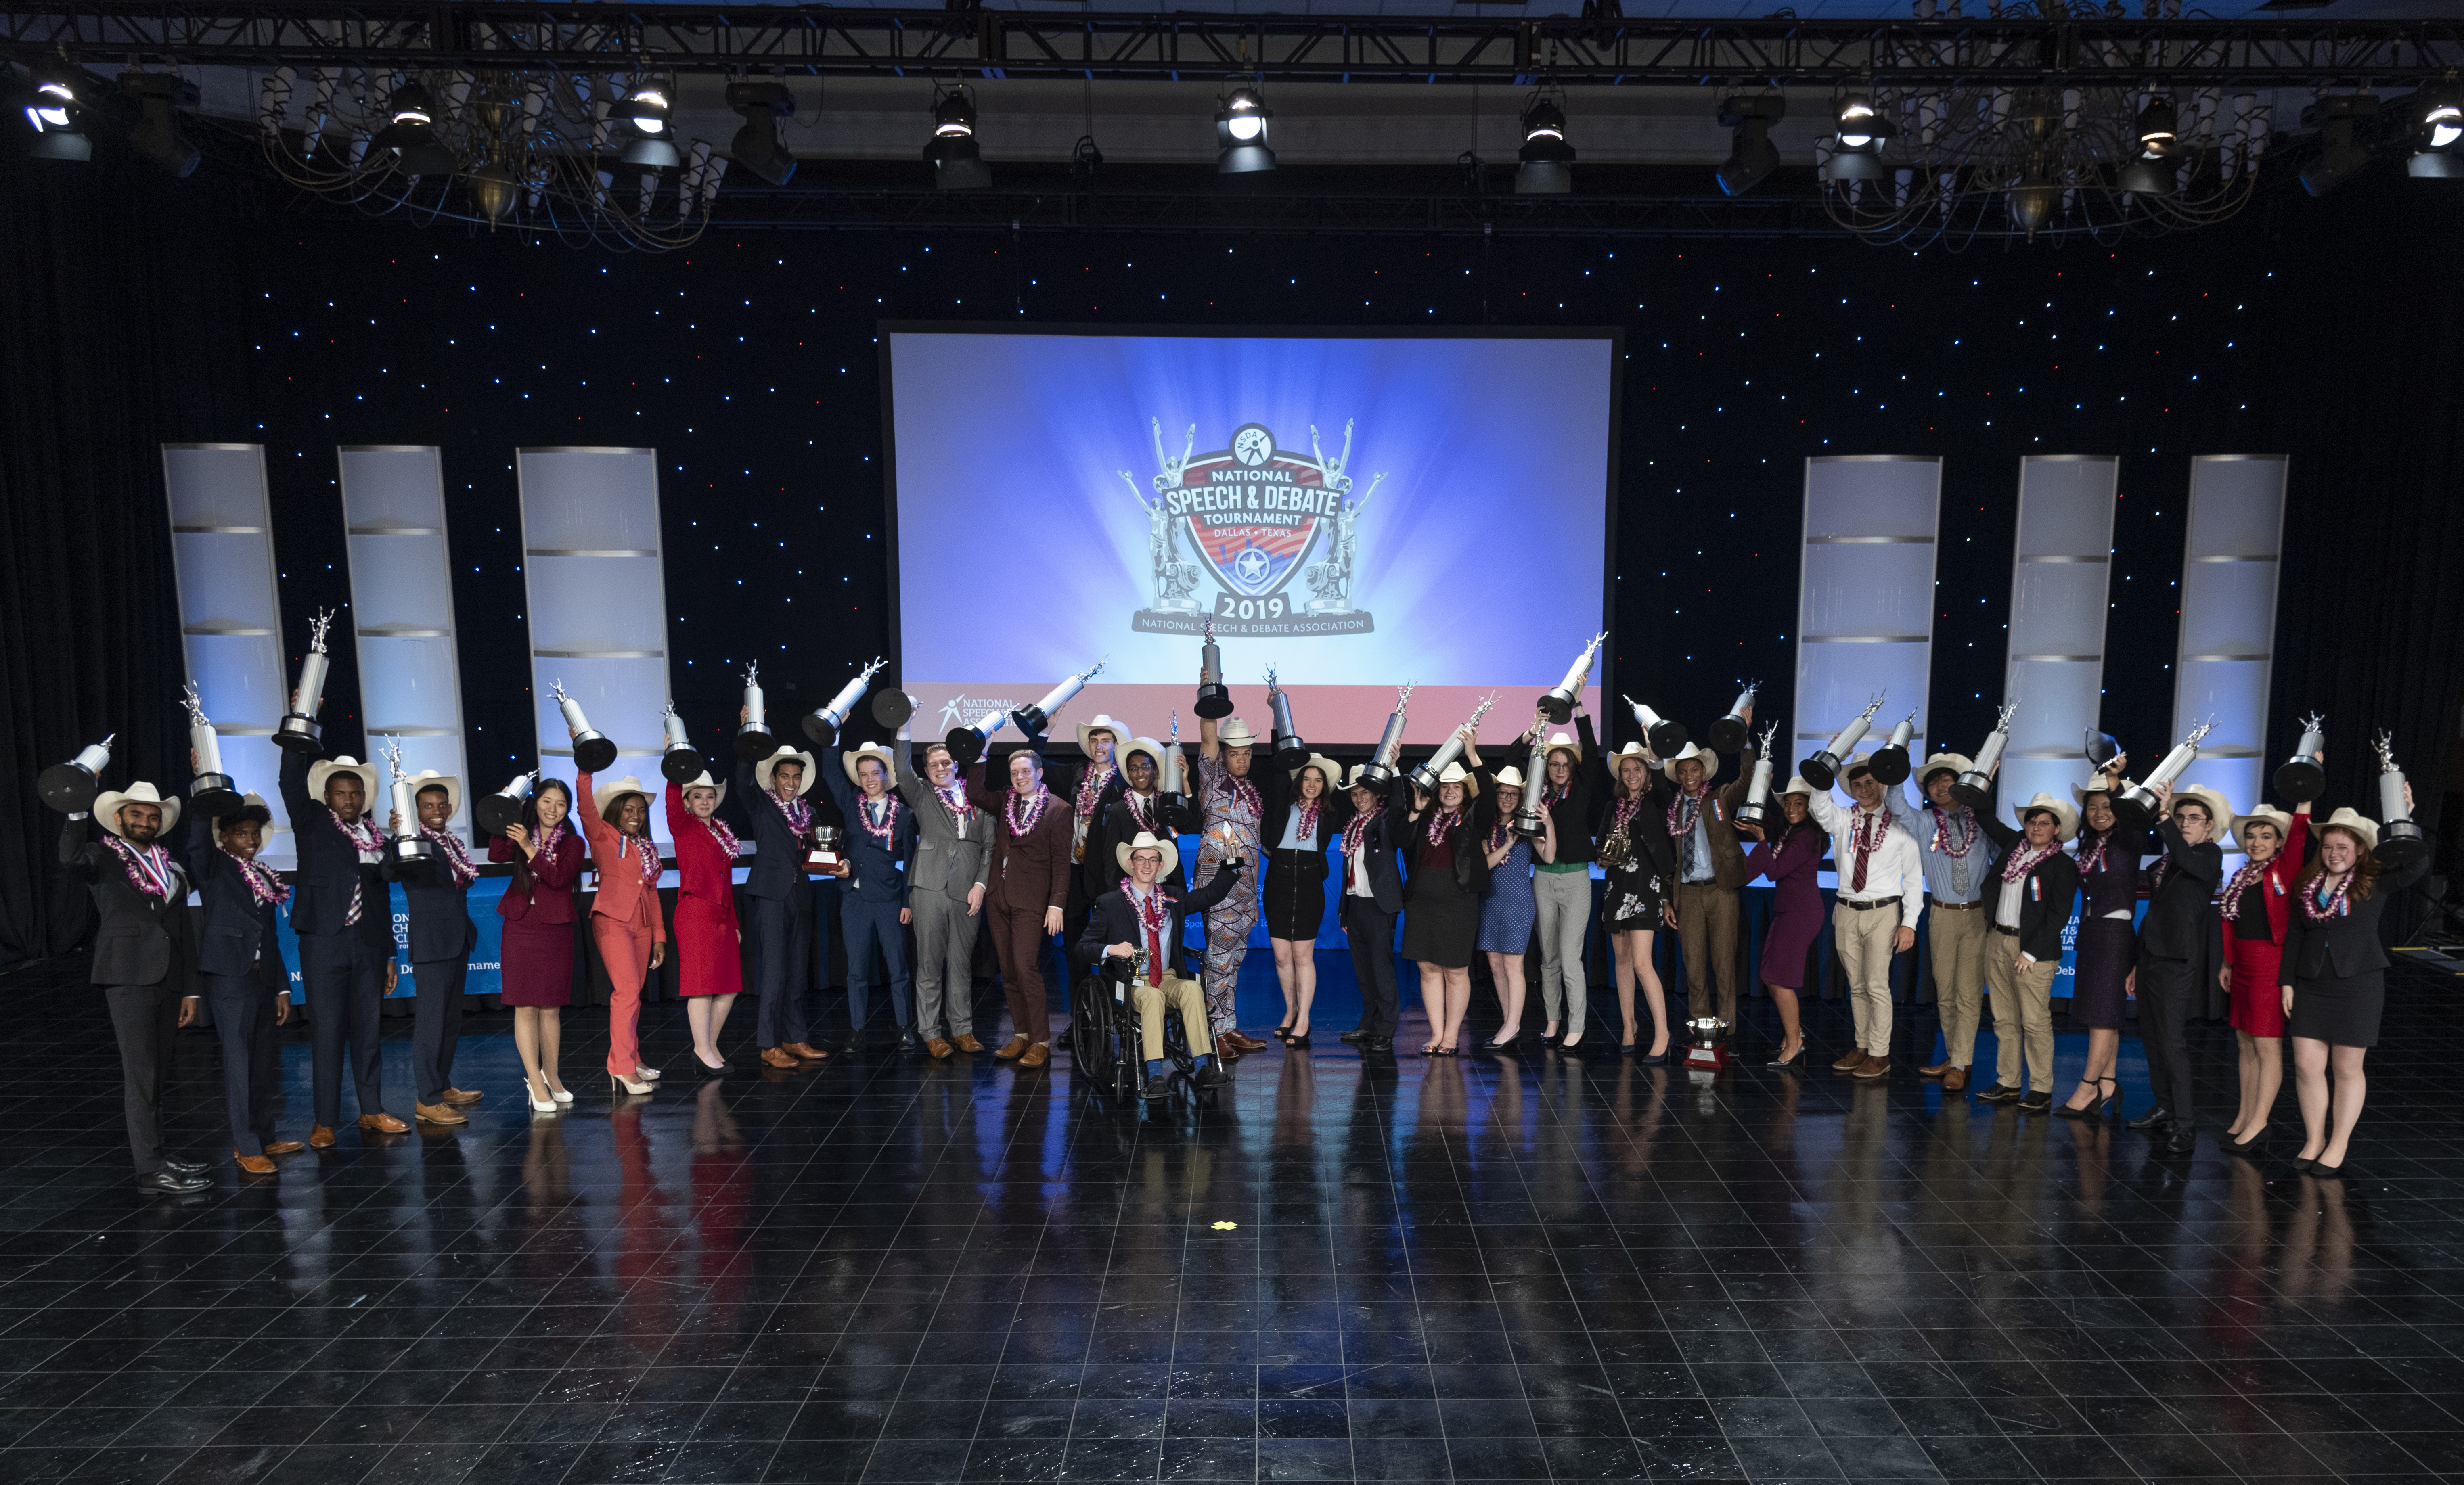 31 High School Students Crowned 2019 National Speech and